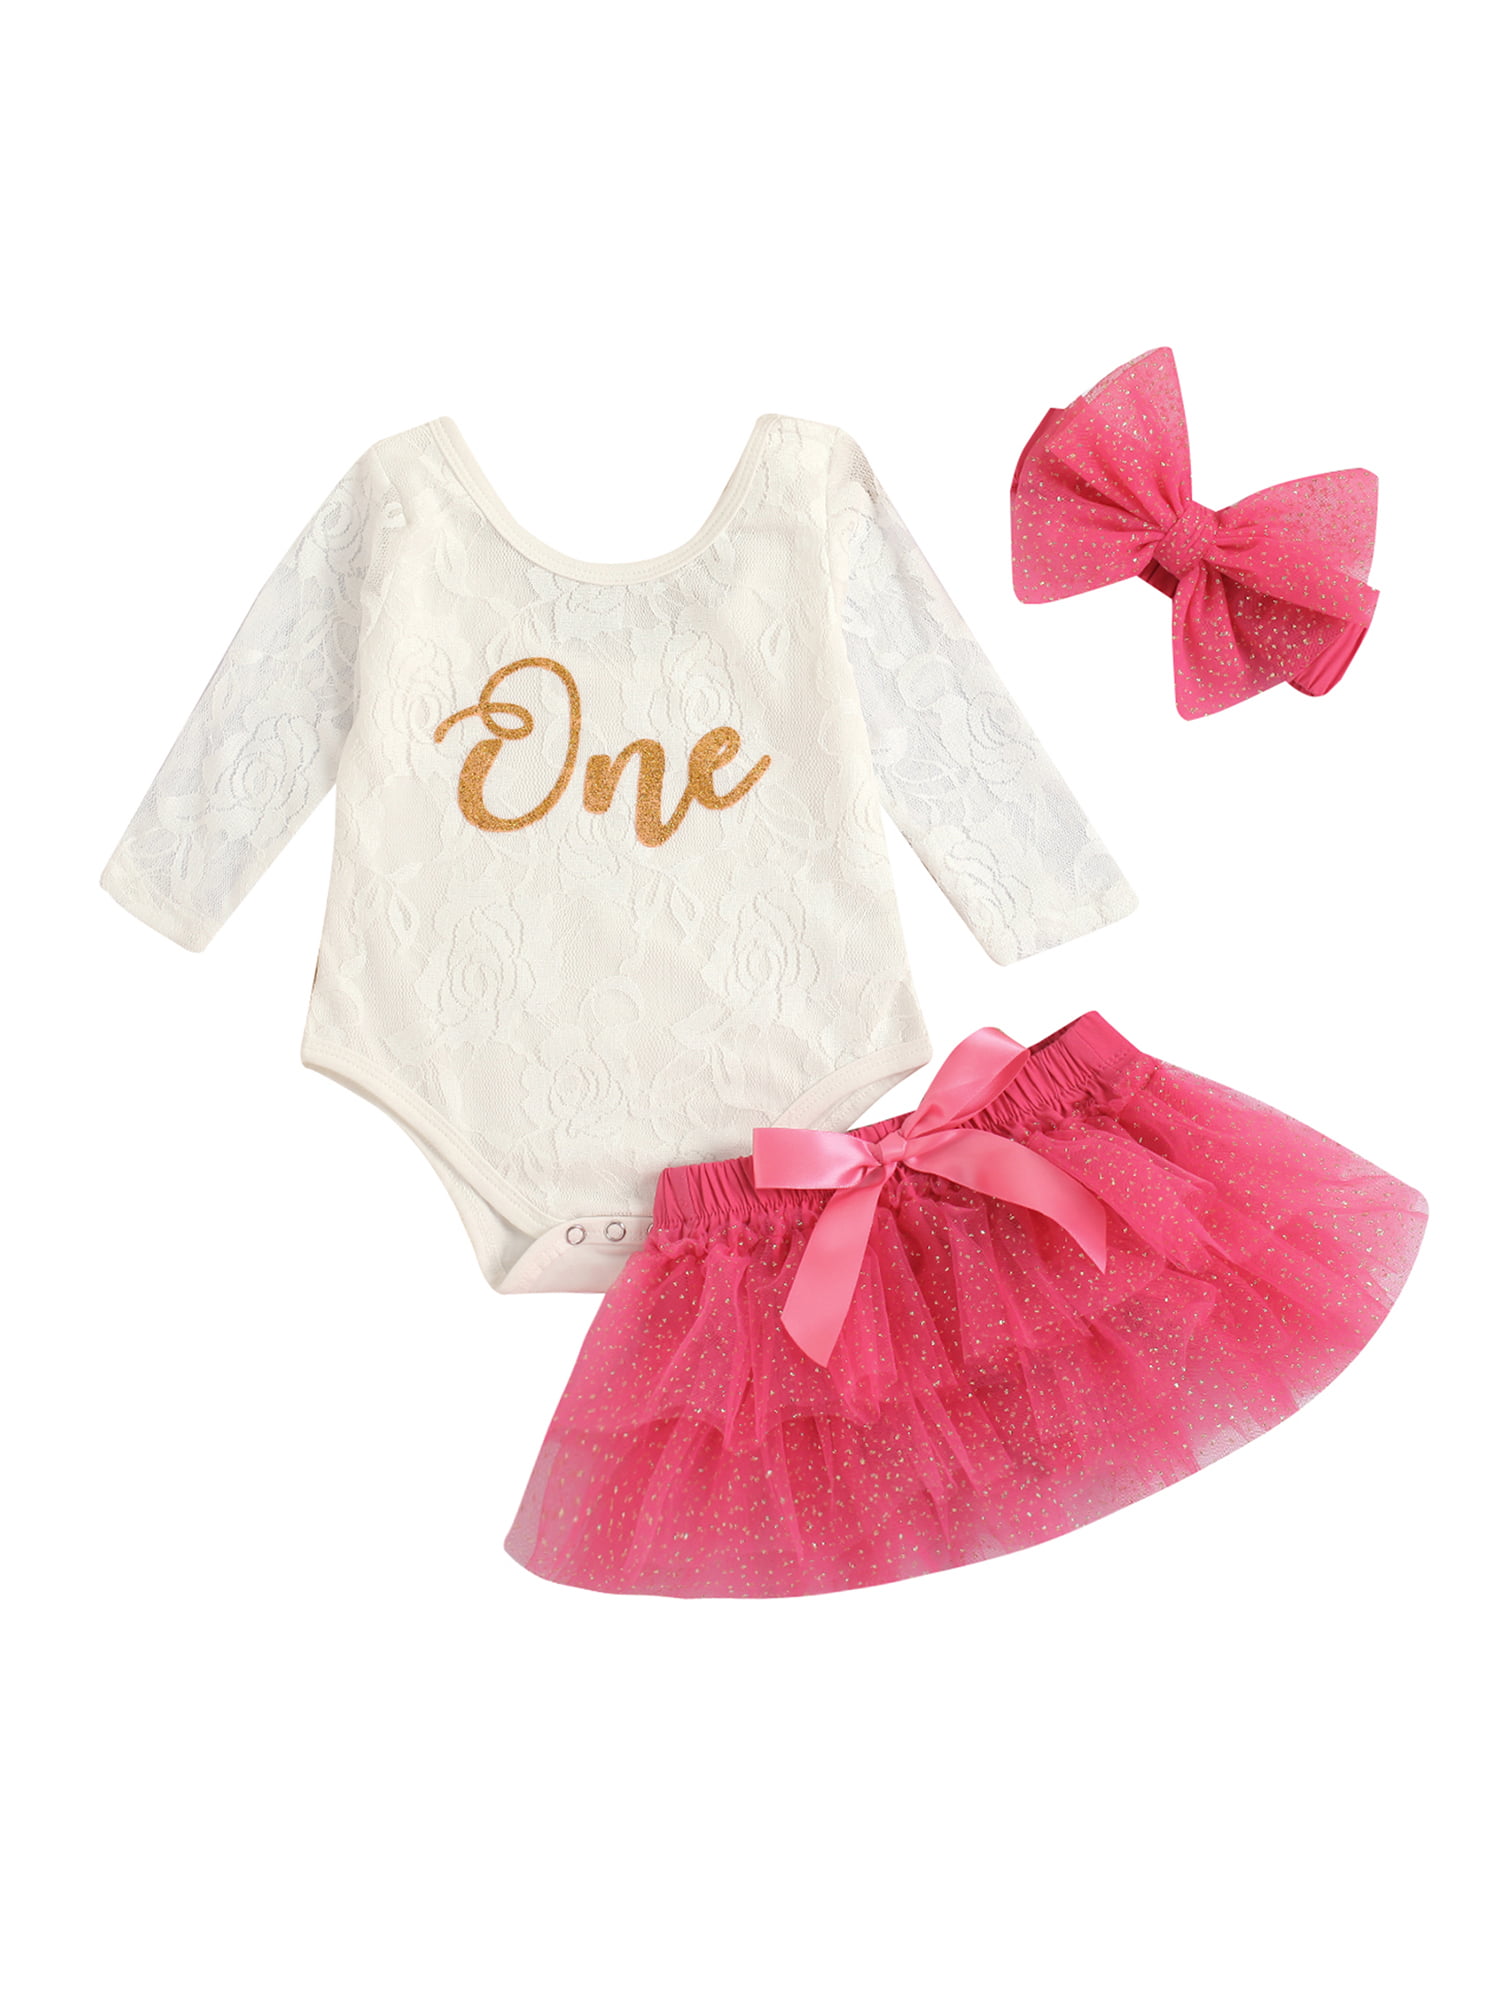 LuckyBB-Baby Girl Cute Outfit Kids Baby Girl Princess Plaid Bow Dress Tops+Tutu Tulle Skirts 2pcs Clothes Set